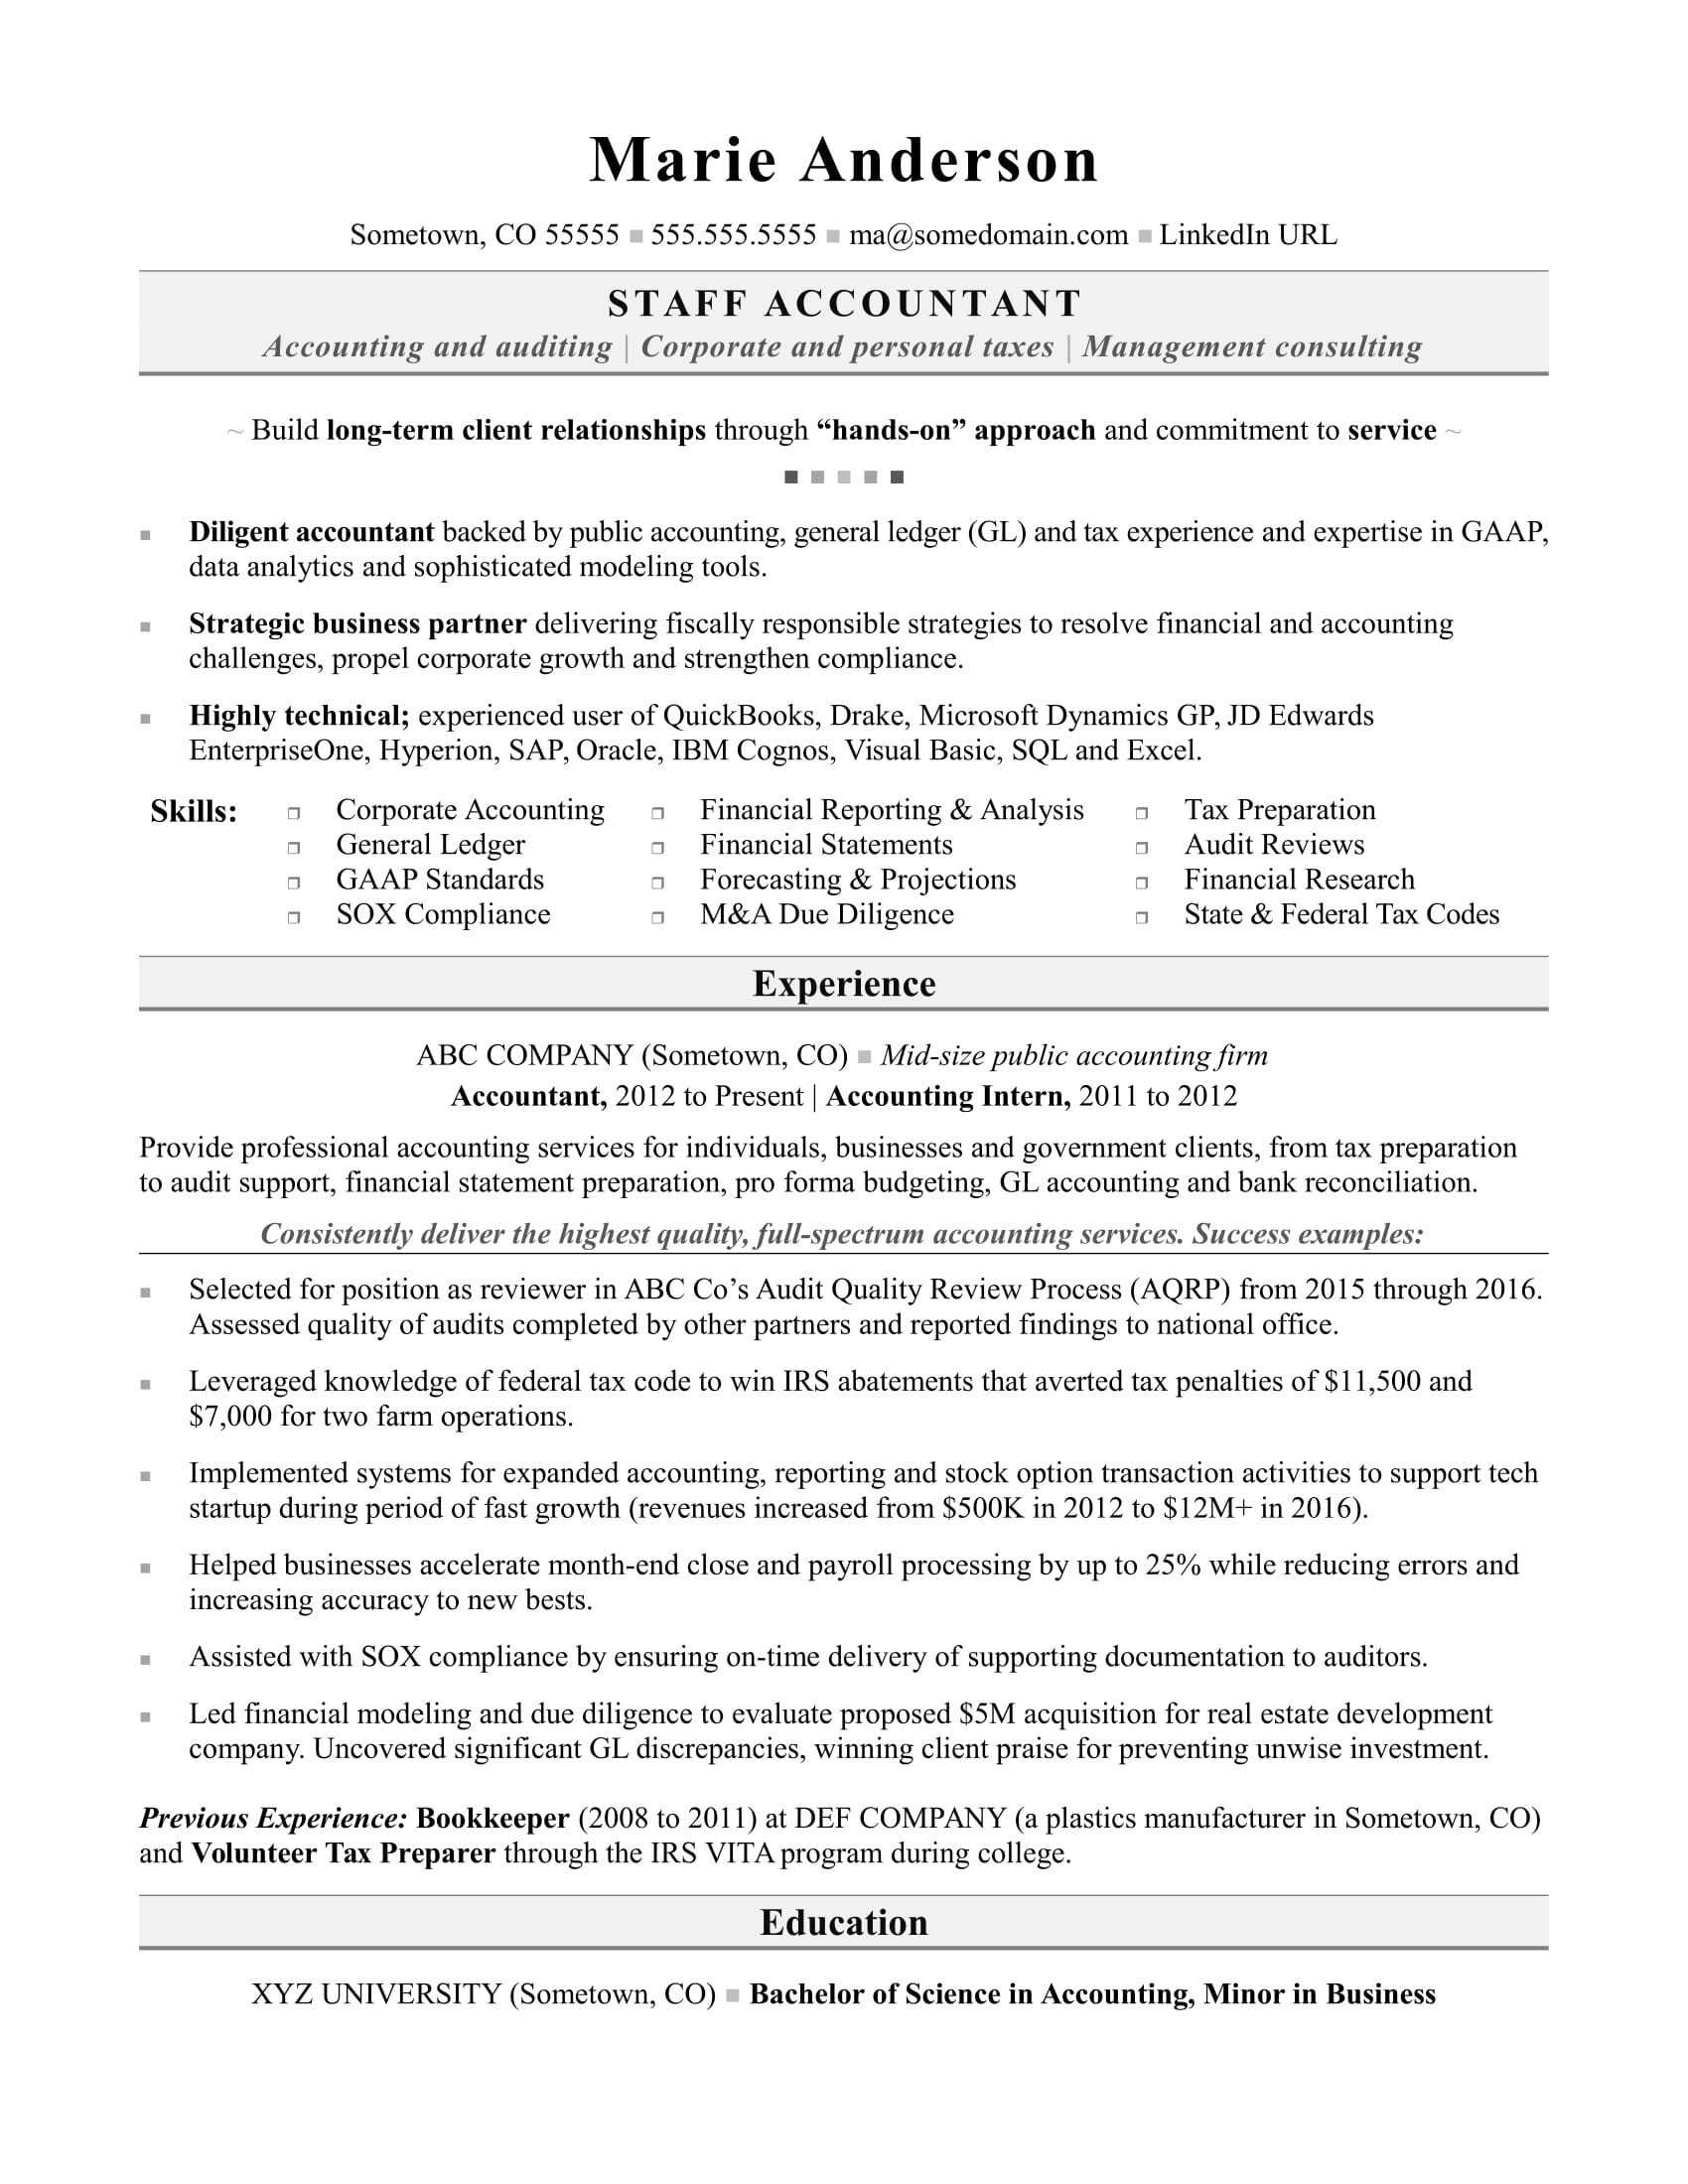 Sample Resume for Accounting Staff In the Philippines Sample Resume Professional Accountant Accounting Resume